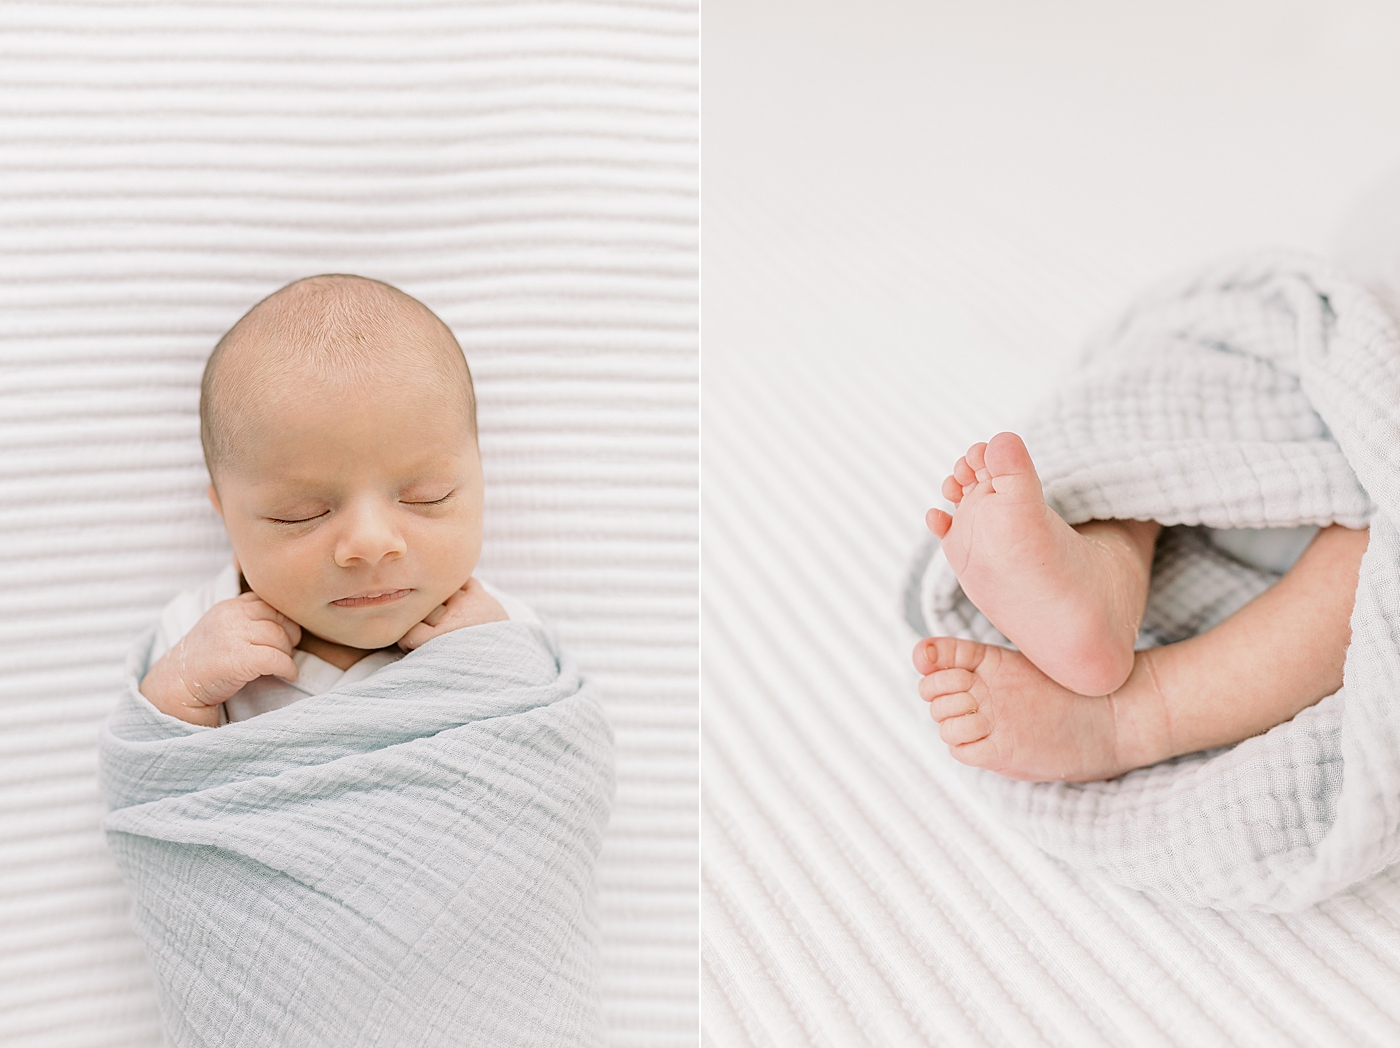 Sleeping baby wrapped in a gray swaddle during lifestyle newborn photos | Image by Caitlyn Motycka